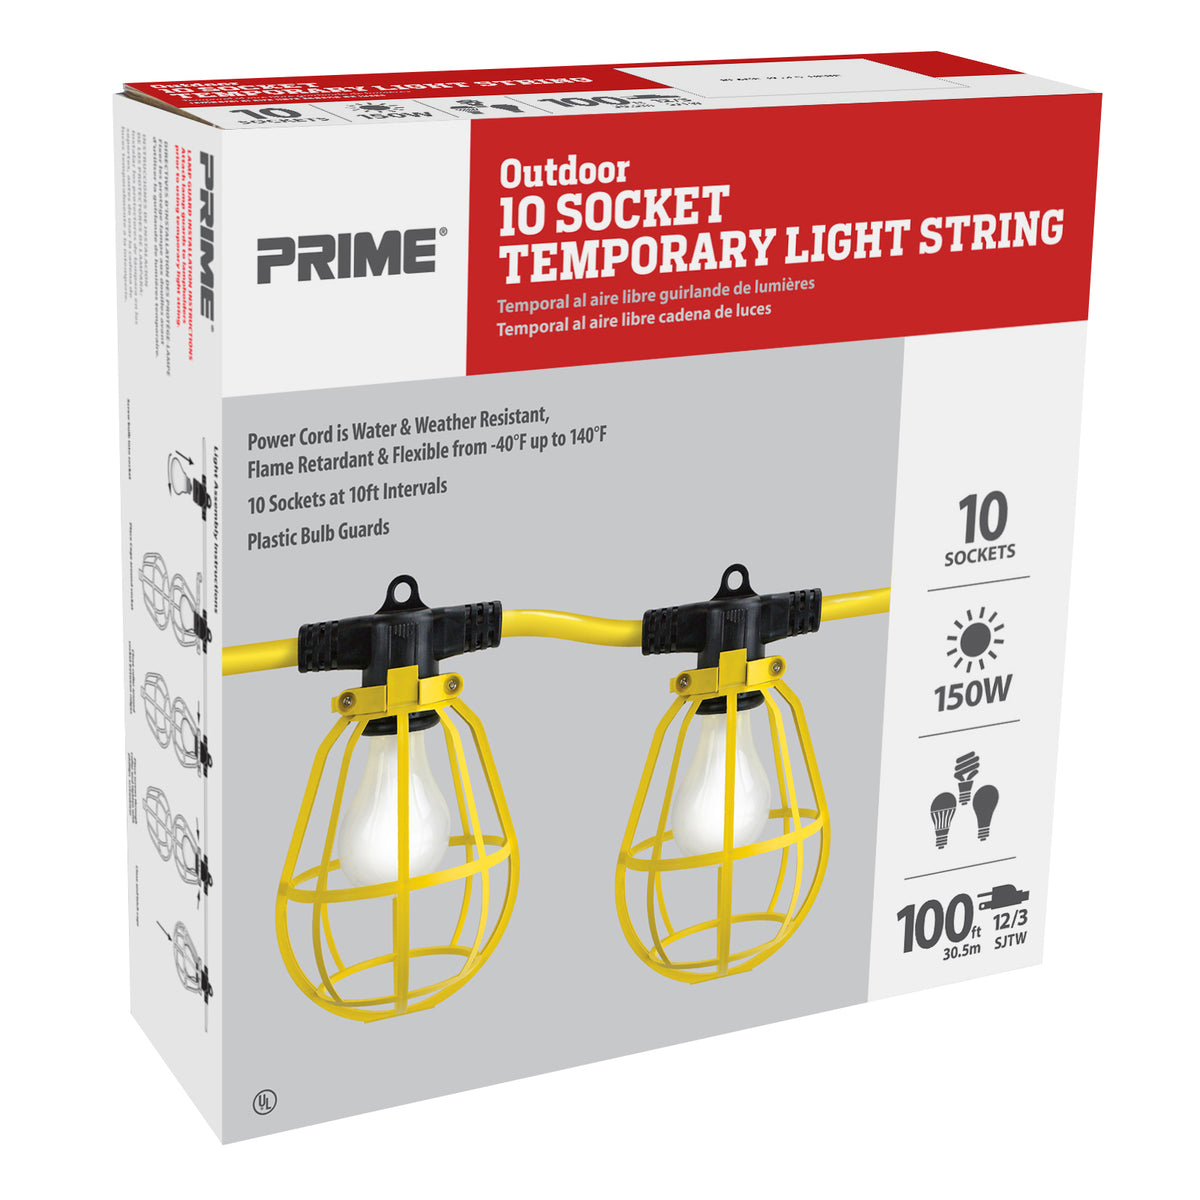 100ft 12/3 SJTW 10-Bulb Light String — Prime Wire & Cable Inc.